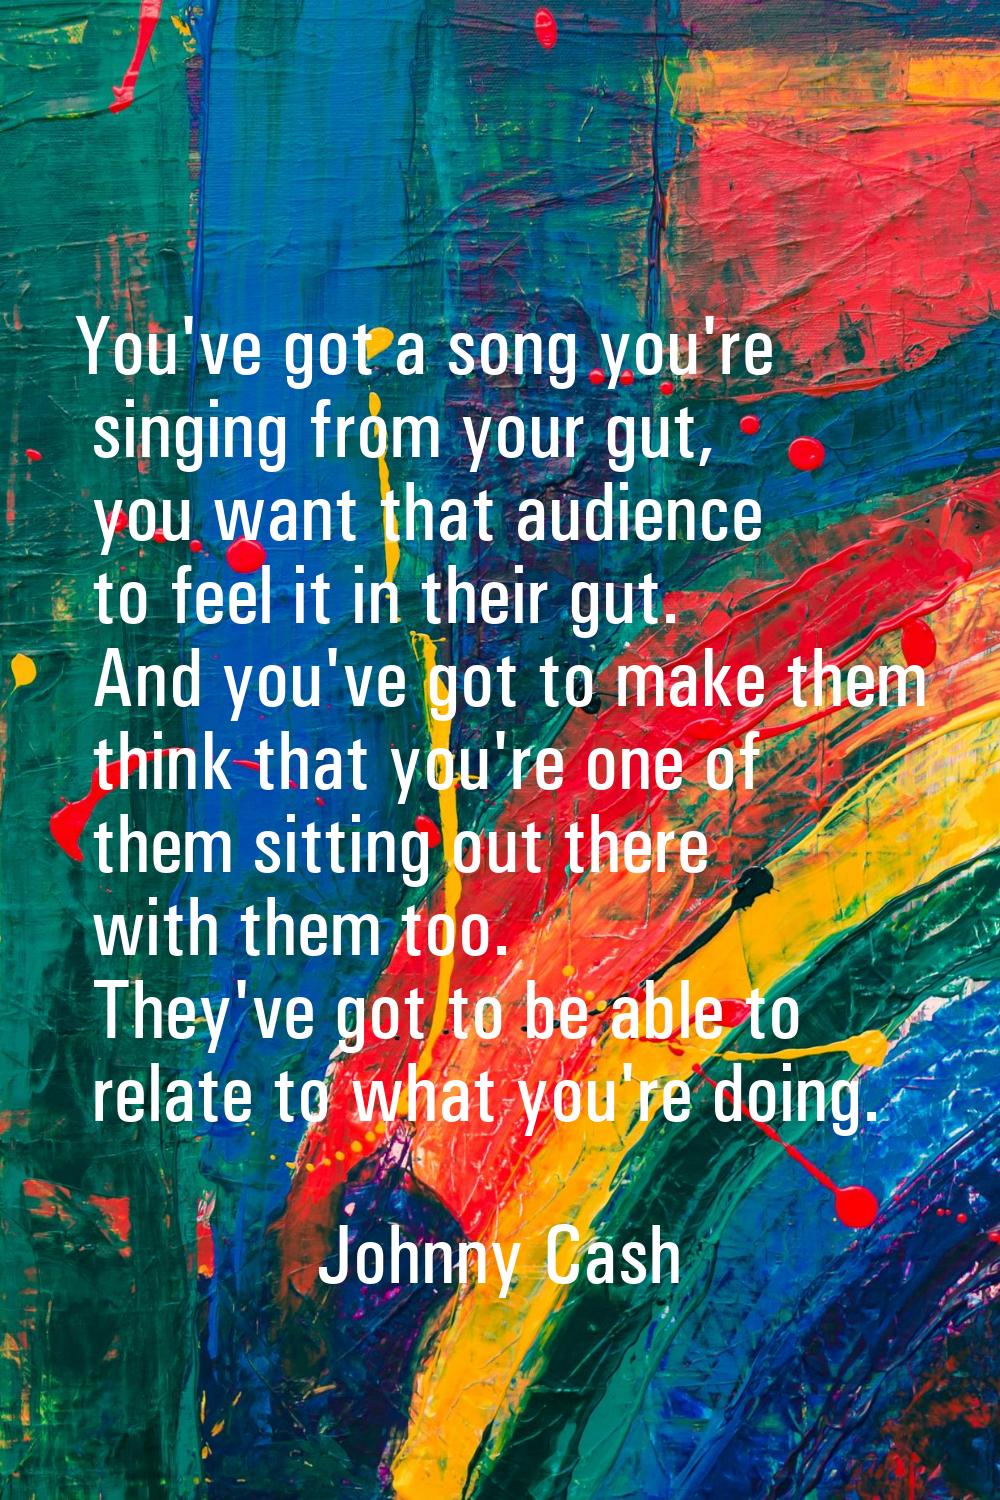 You've got a song you're singing from your gut, you want that audience to feel it in their gut. And